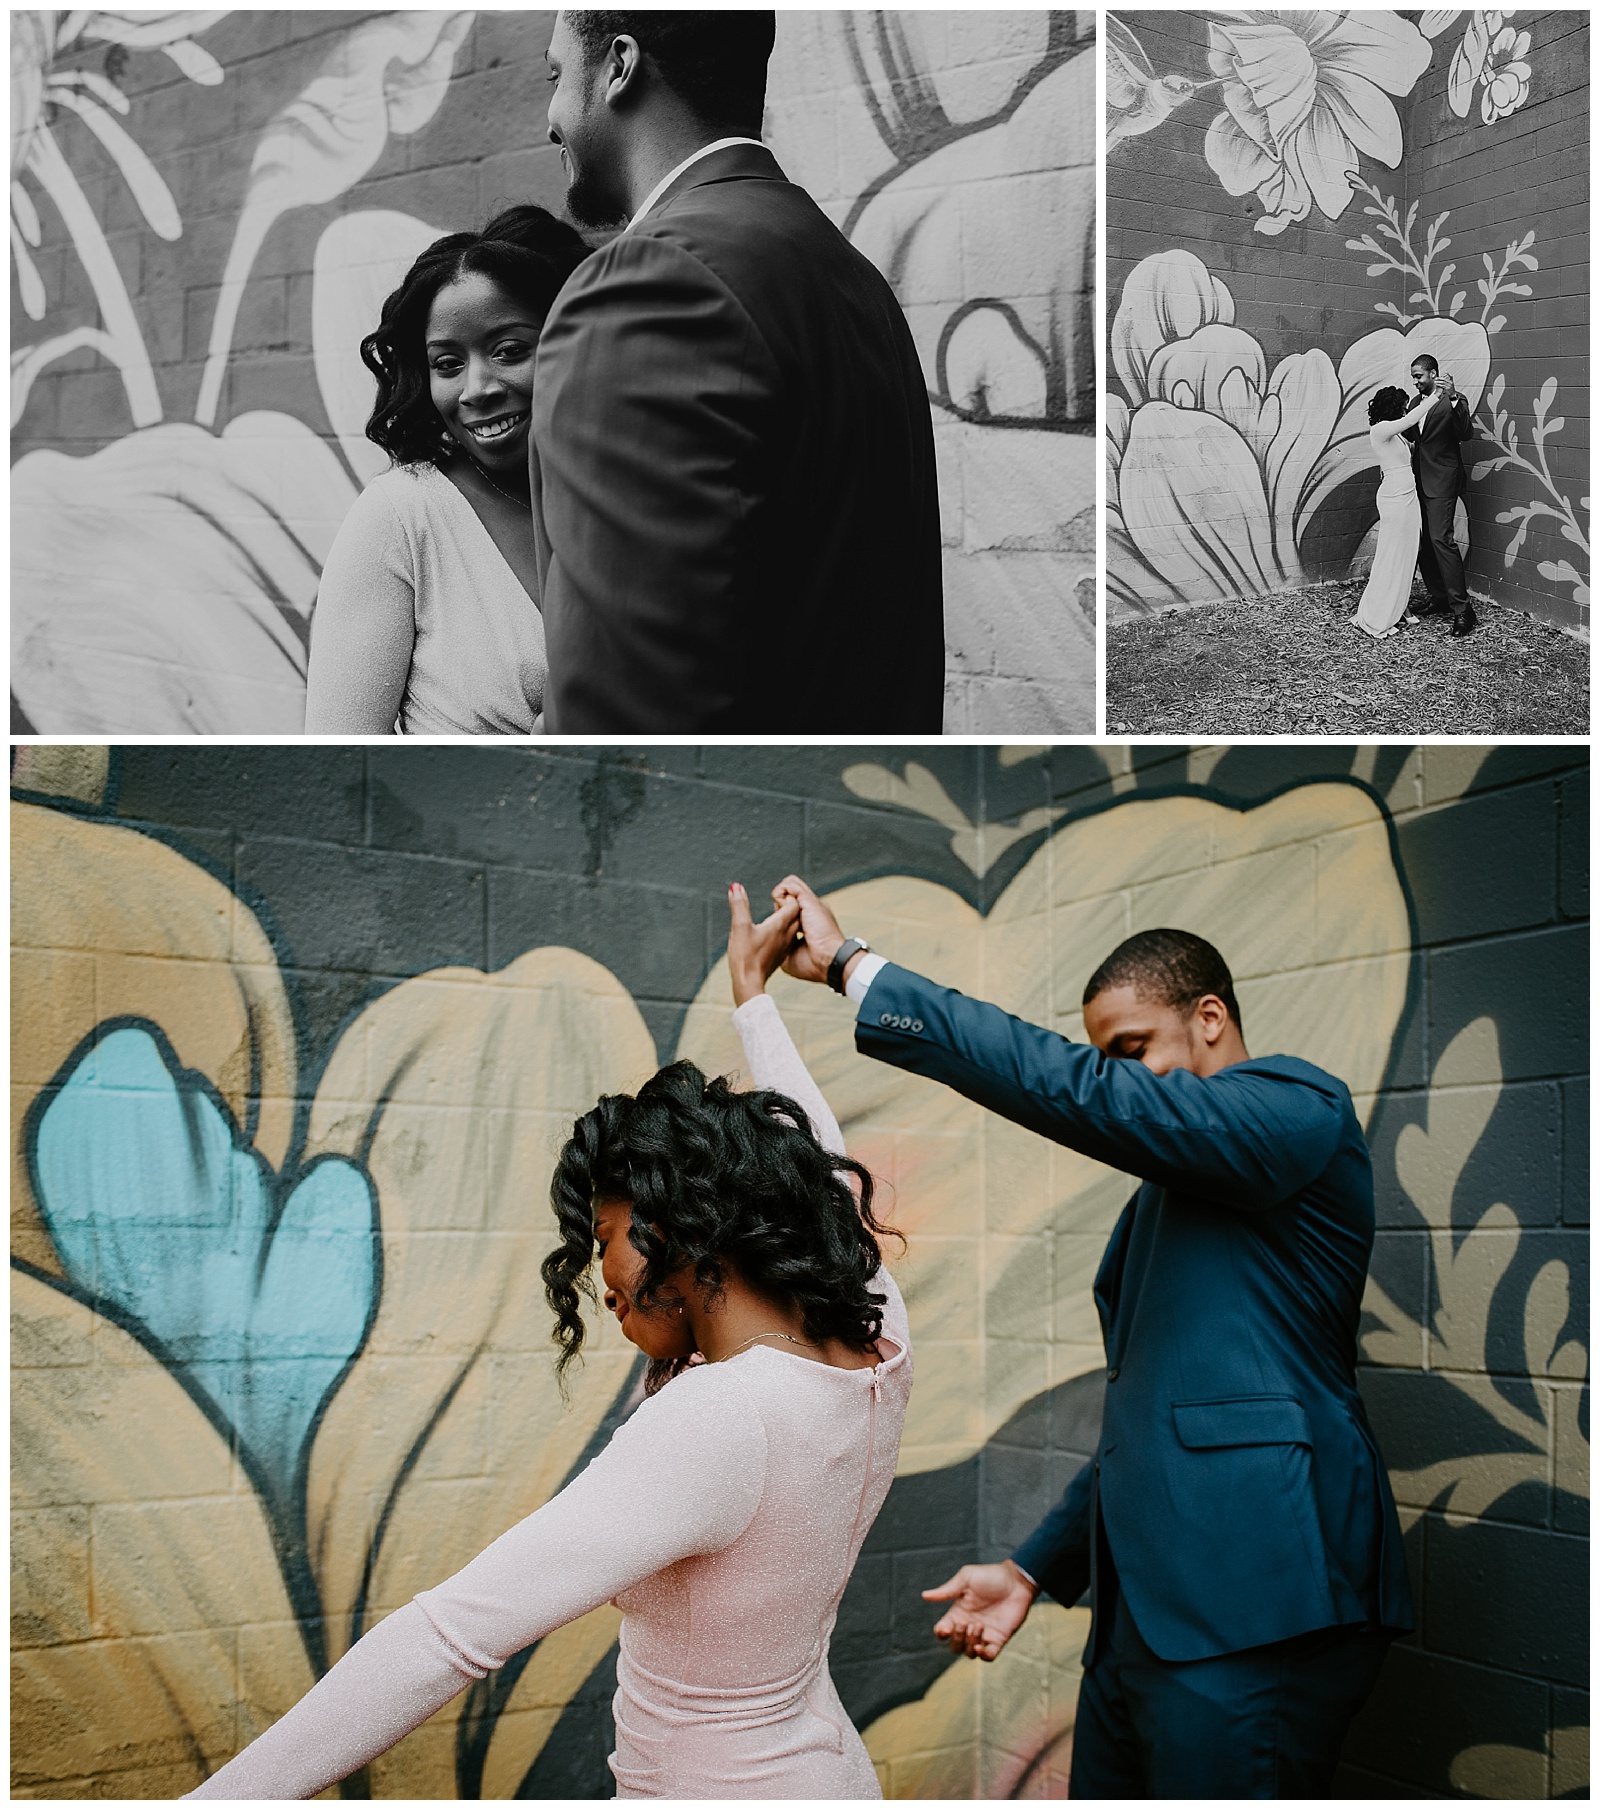 Grand Rapids Engagment Photographer Black Photography Wedding African American couples Michigan Detroit Wedding and elopement